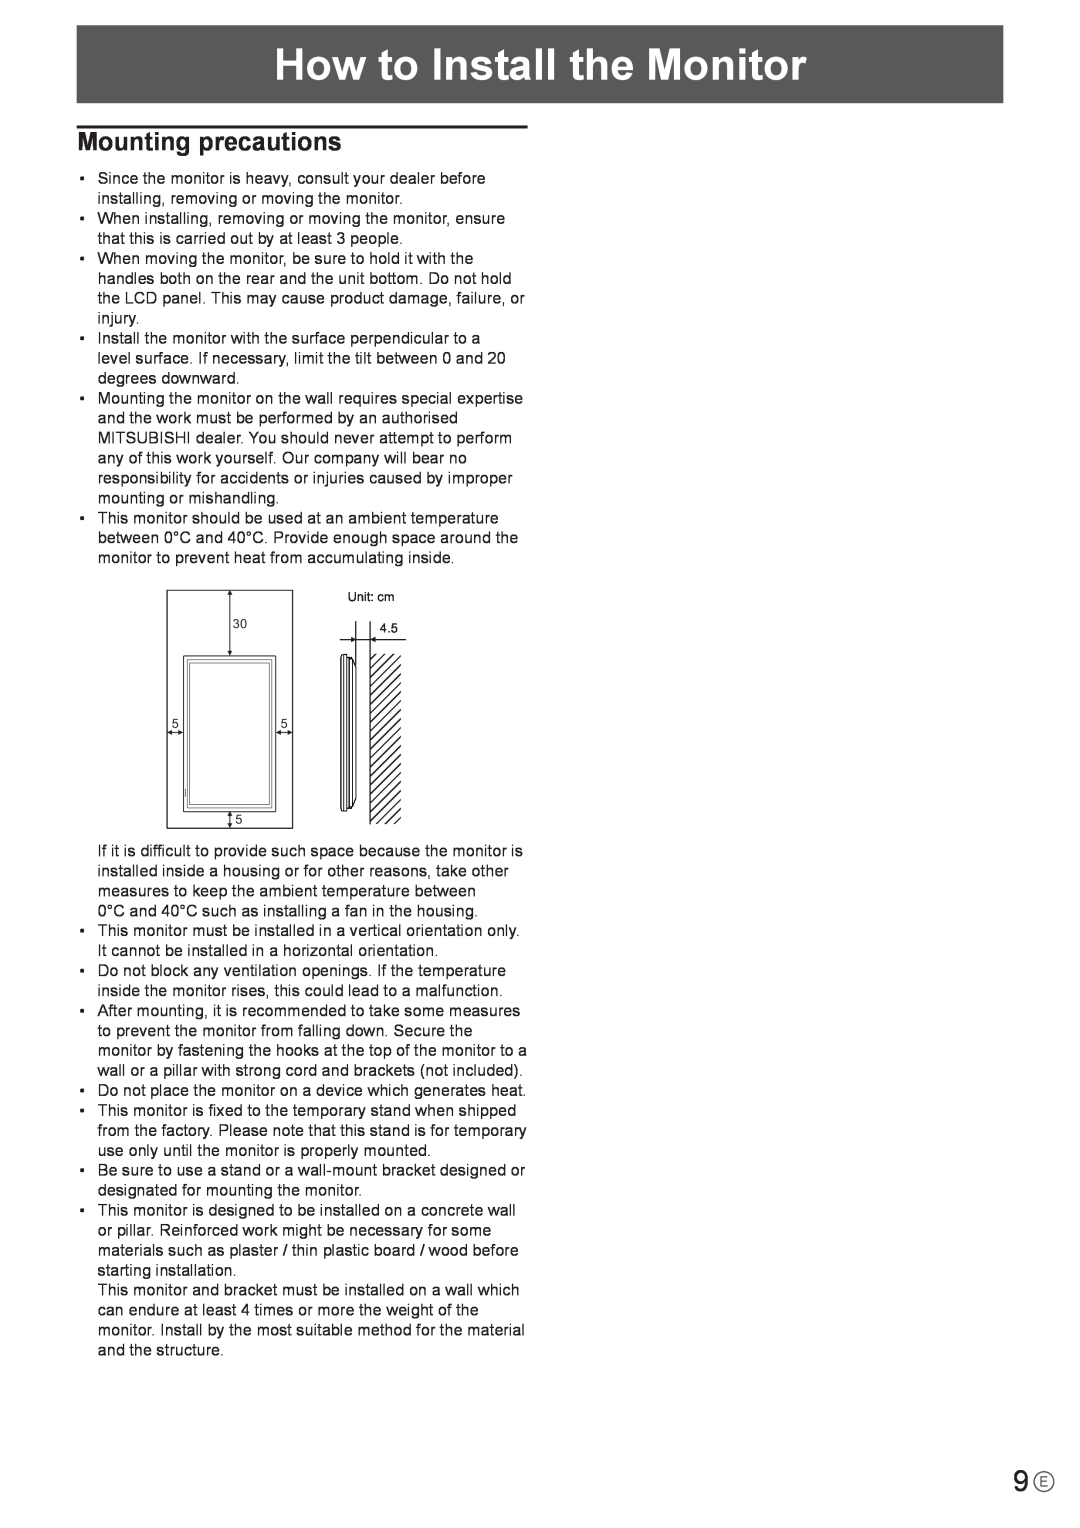 Mitsubishi Electronics LDT651P operation manual How to Install the Monitor, Mounting precautions 